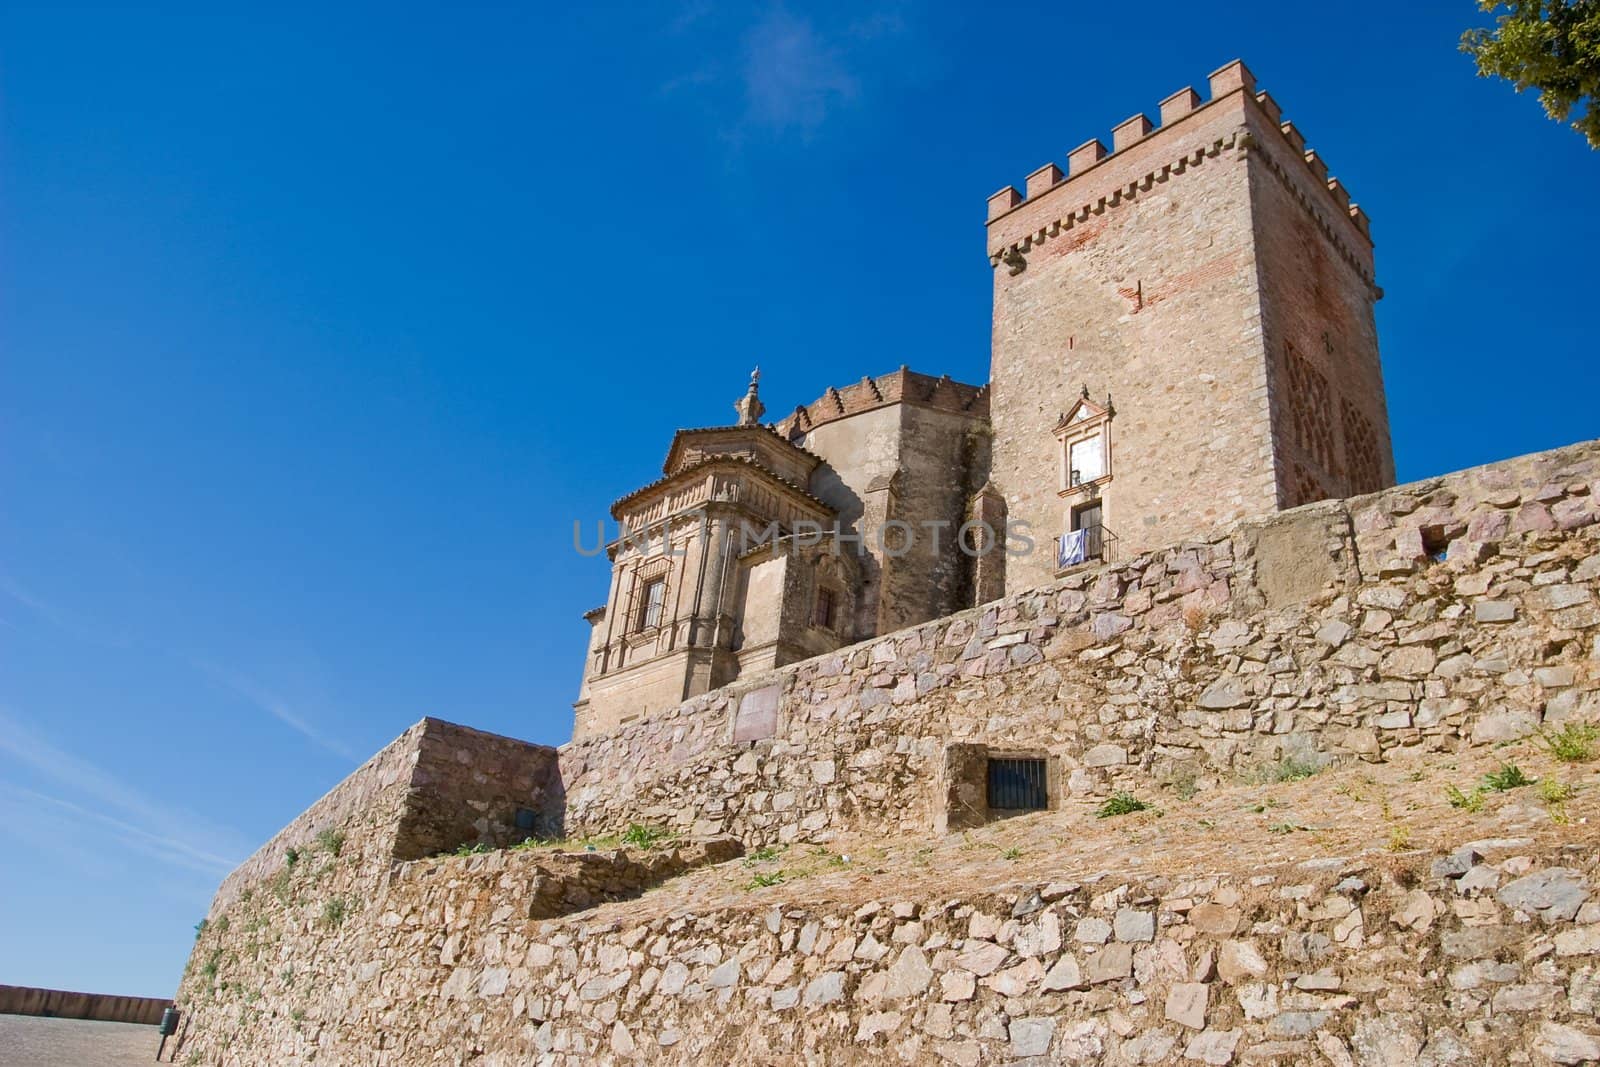 Castle that raise Aracena's city, placed in the mountain range of the same name.